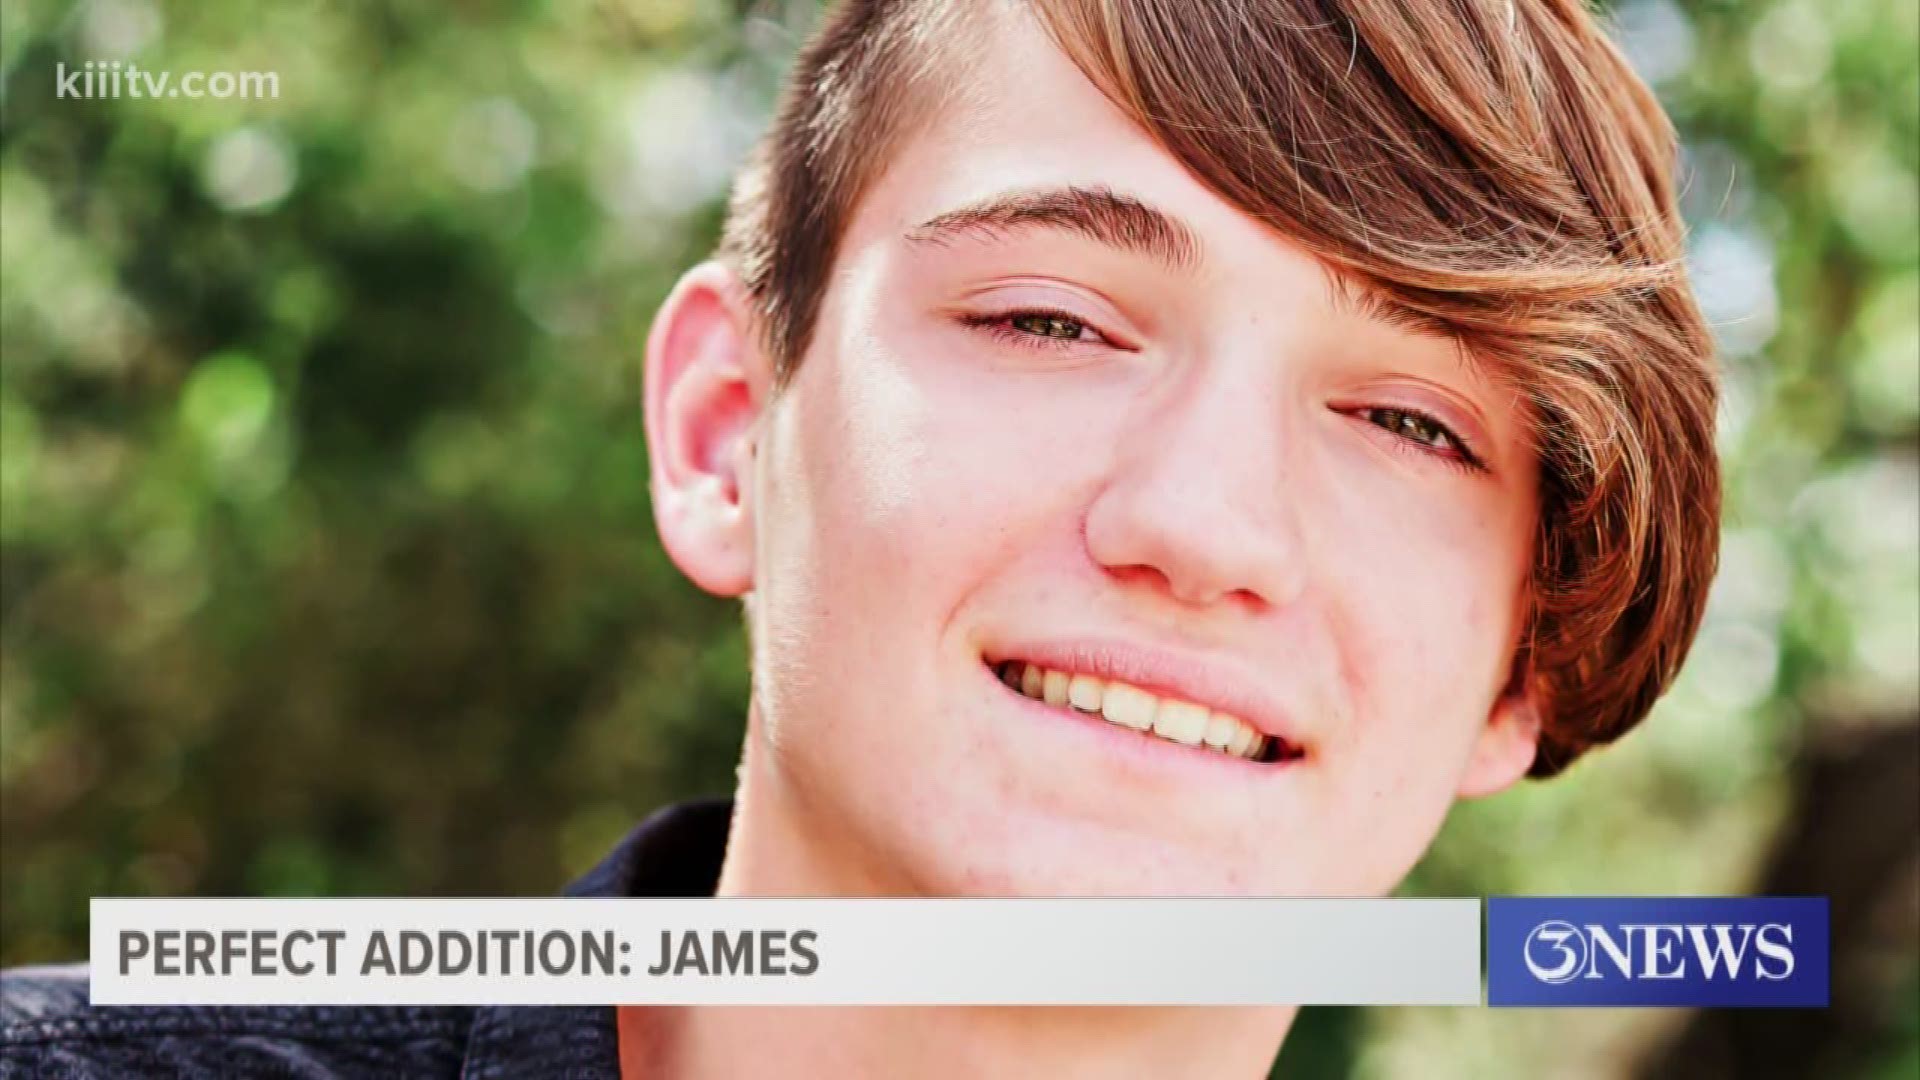 A 16-year-old from Corpus Christi is waiting for his forever family.
James is just one of the many children and teens in Nueces County waiting to be adopted.